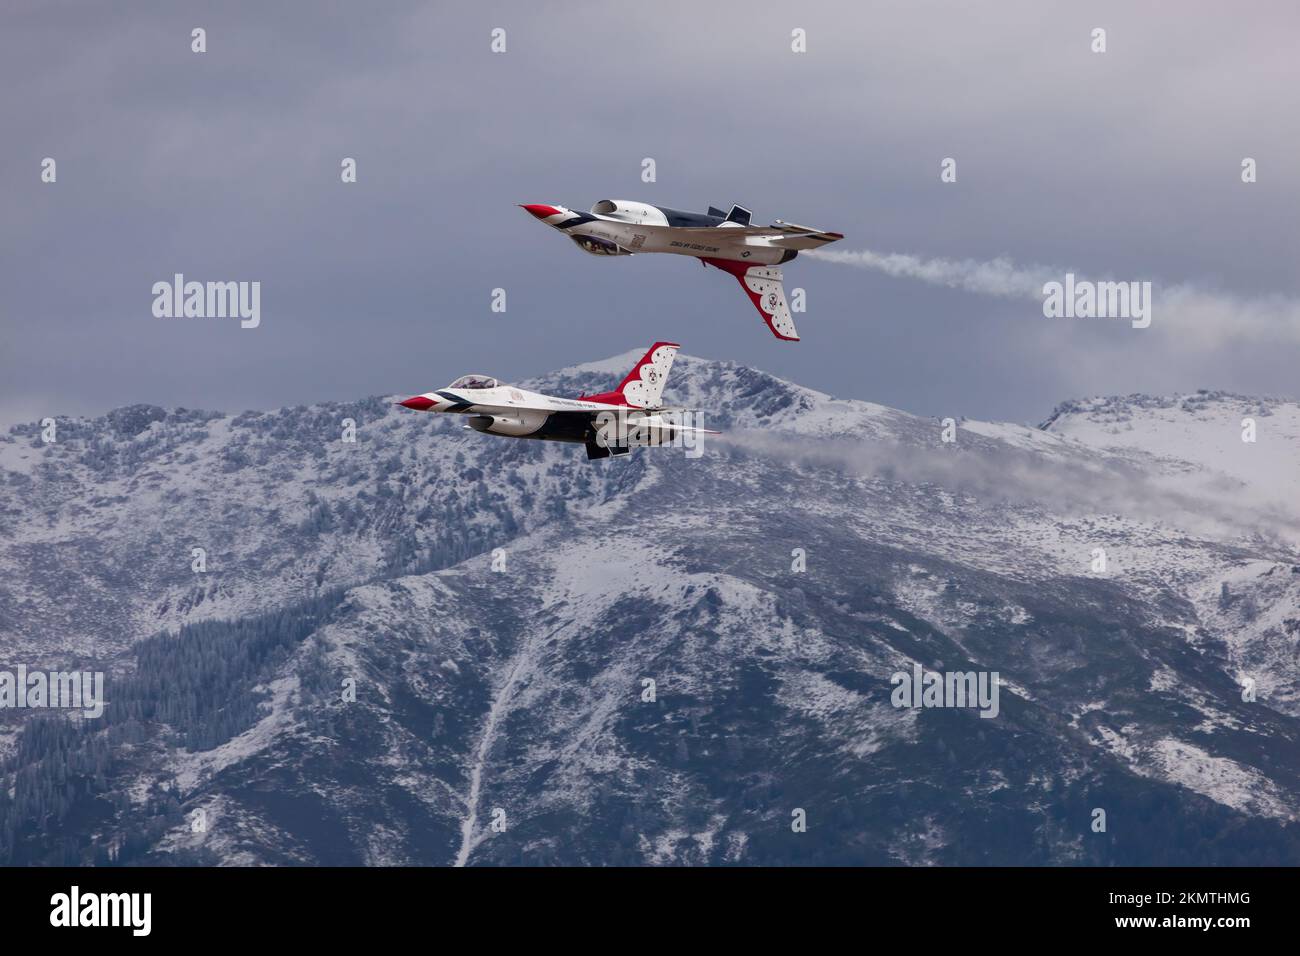 A pair of US Air Force Thunderbirds in tight formation with the snow-capped Wasatch Range in the background, Hill Air Force Base, Utah Stock Photo